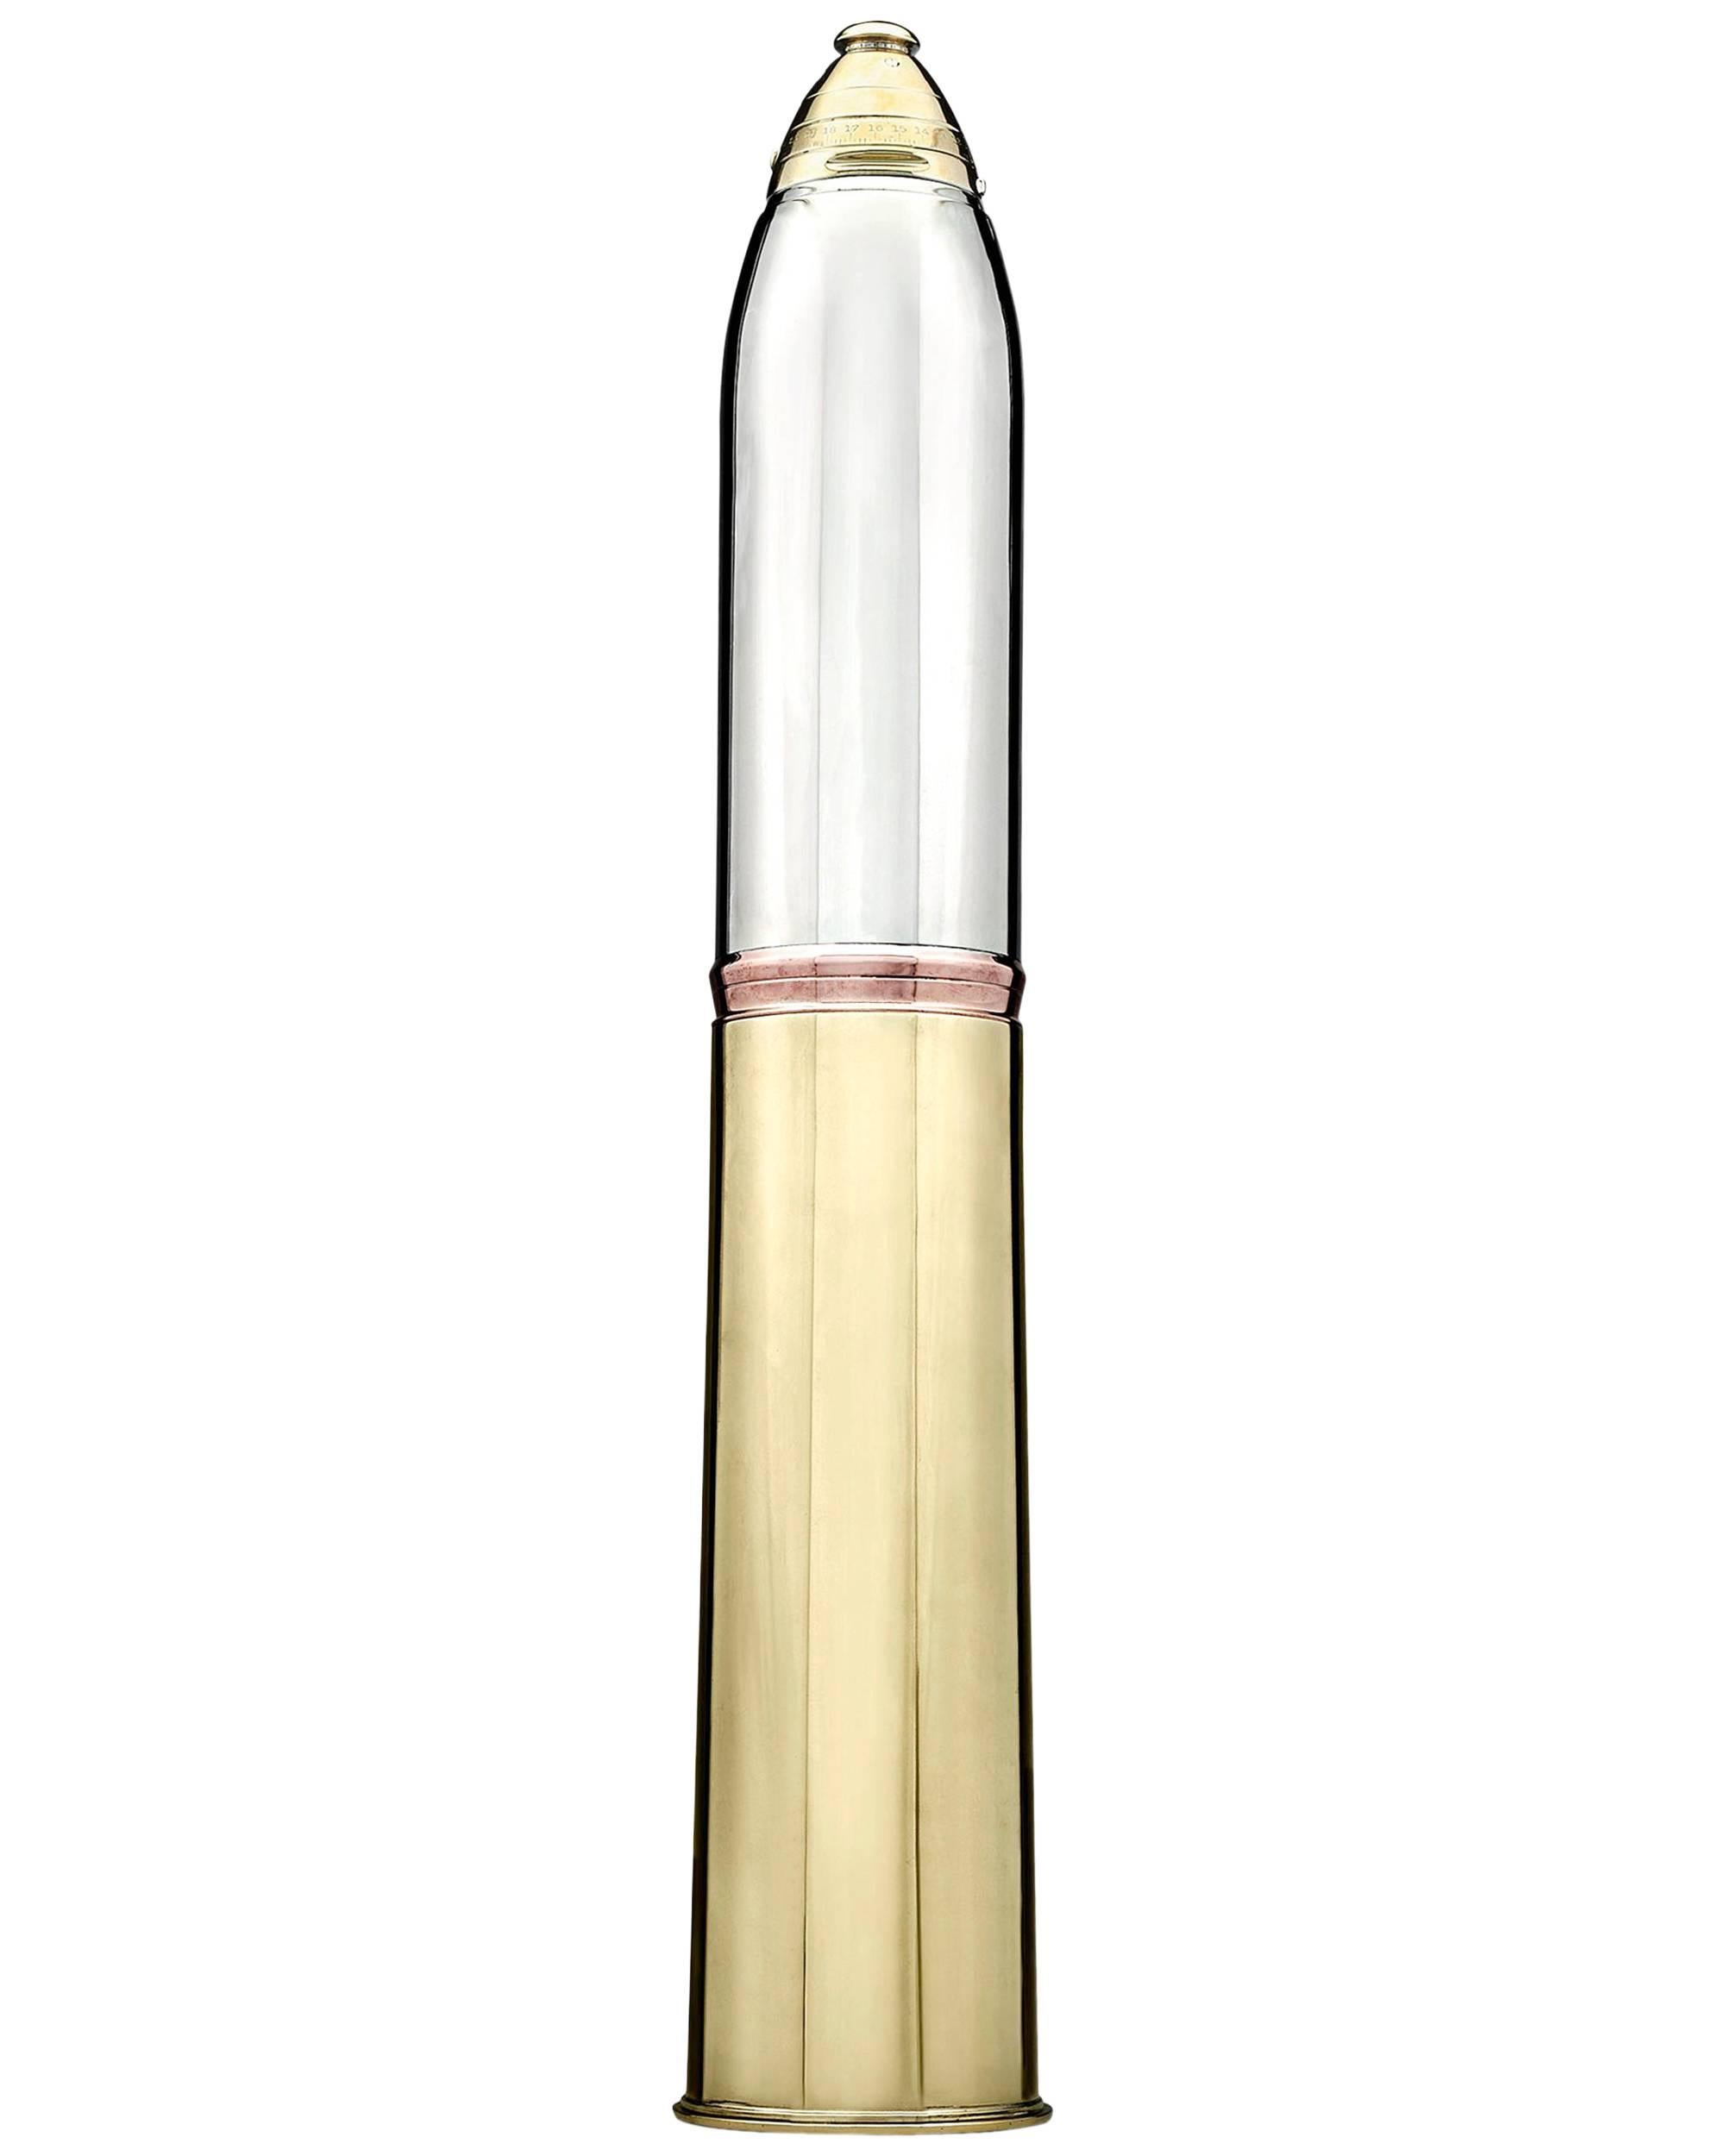 Artillery Shell Cocktail Shaker by Gorham